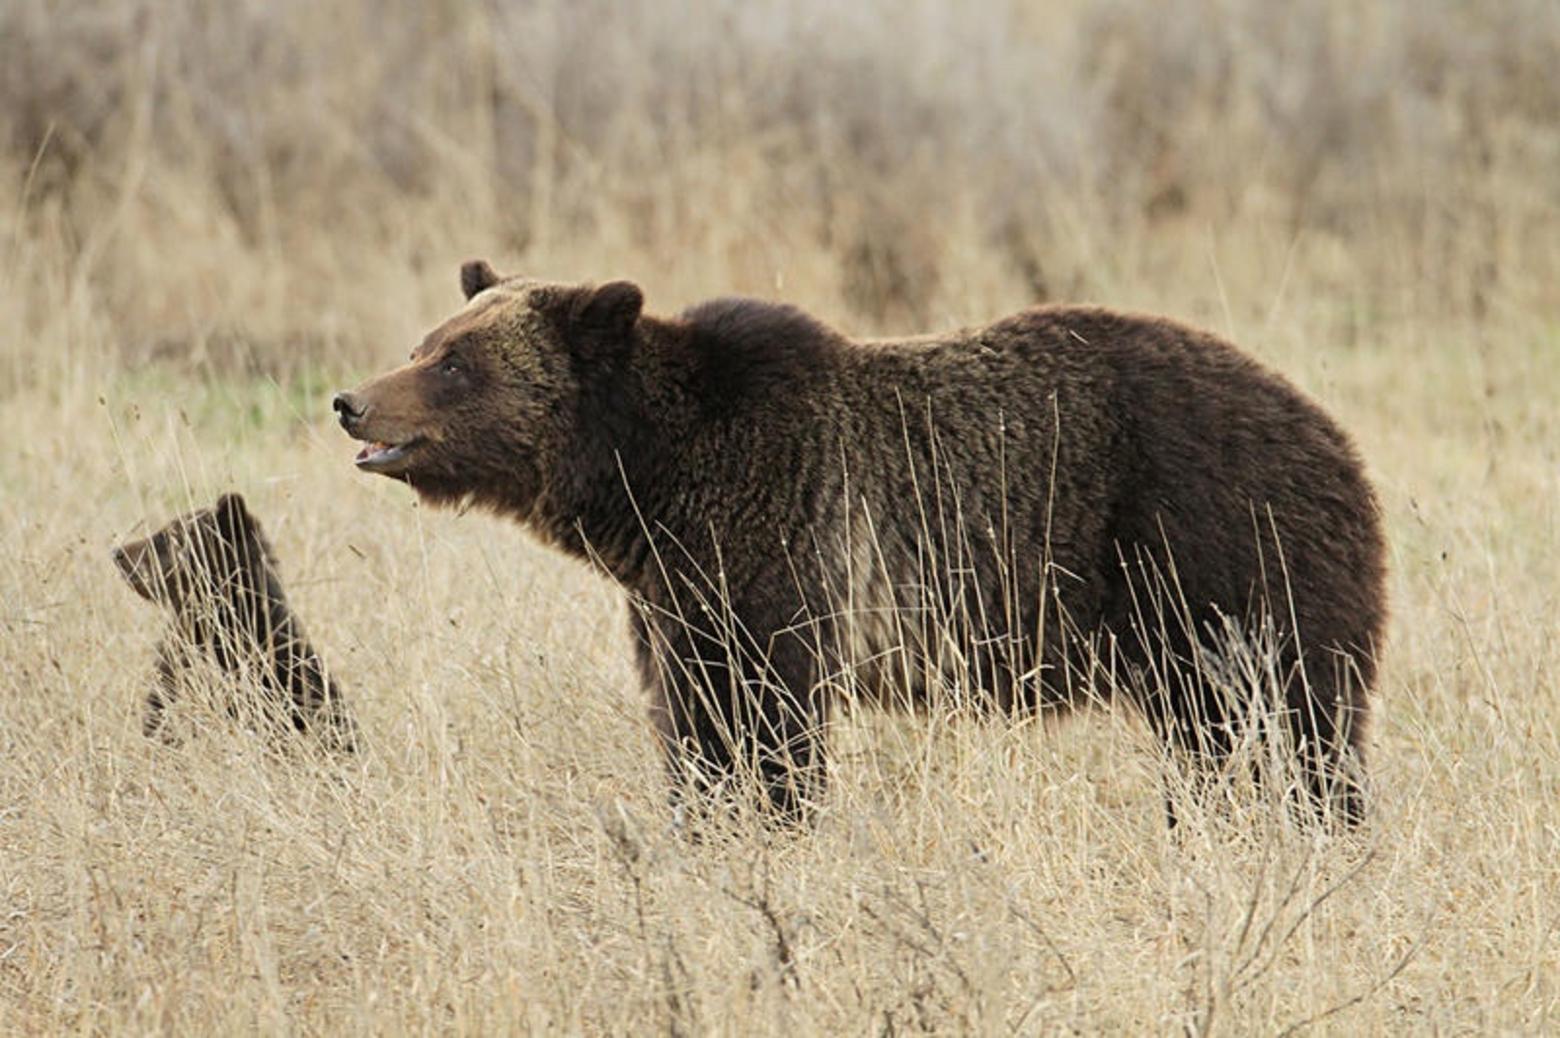 In addition to concerns raised about black bear baits luring in grizzlies and getting them hooked on unwanted foods is the possibility of grizzly bear mothers getting shot, leaving their cubs orphaned and likely to die. Photograph courtesy Jim Peaco/NPS